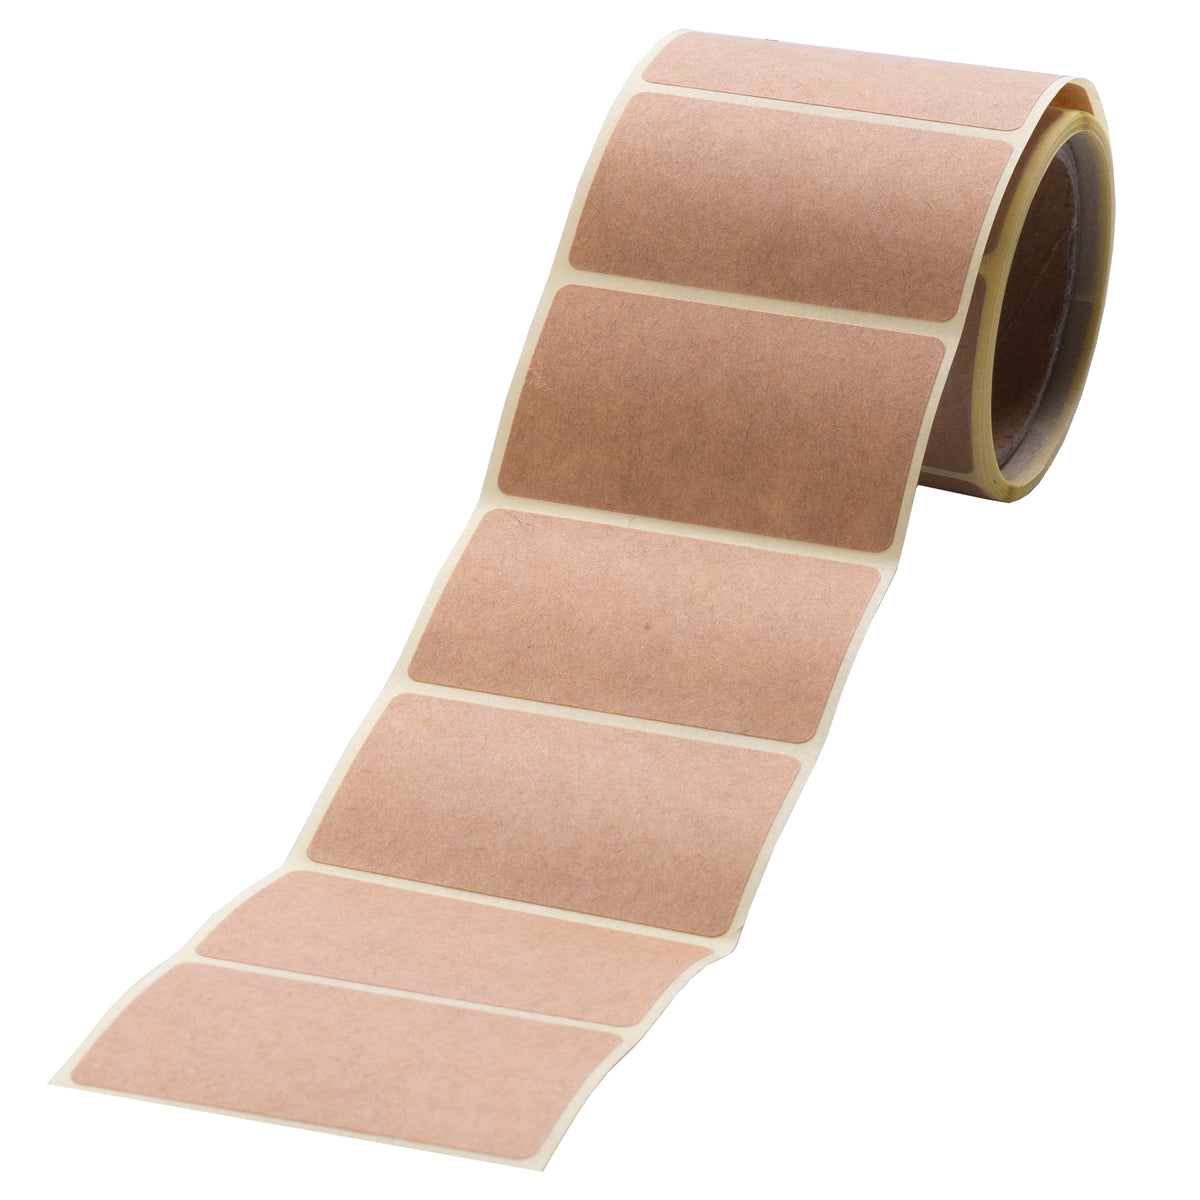 Kraft labels on roll 50 x 30 mm 100 pcs smooth paper